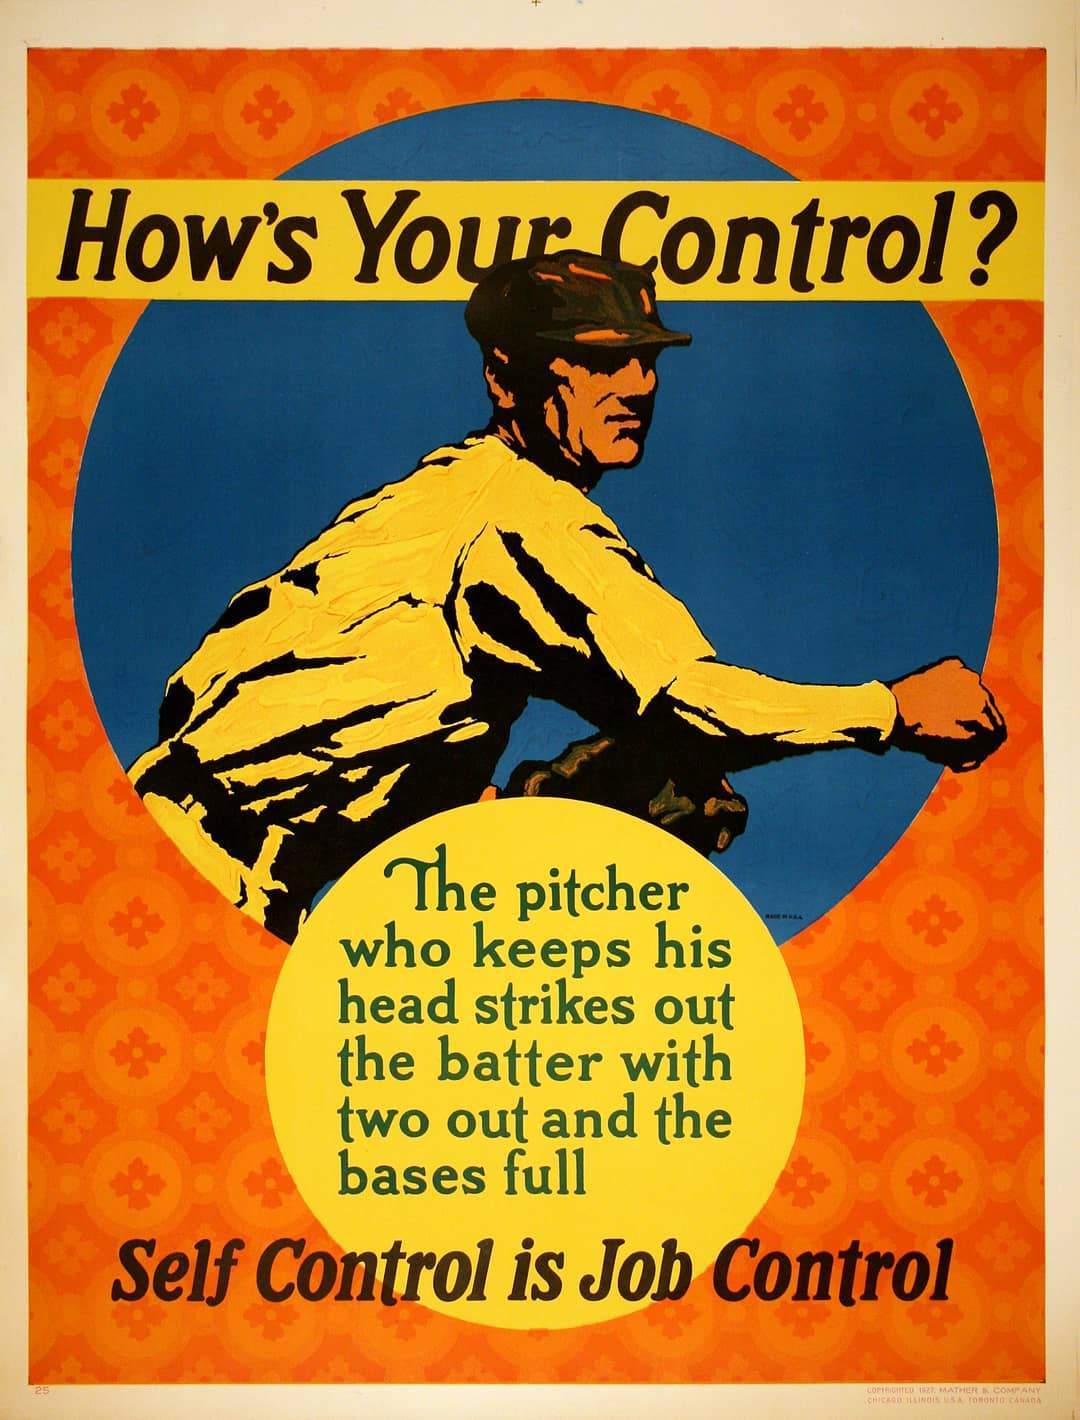 Original Mather Work Incentive Poster 1927 - How's Your Control Baseball